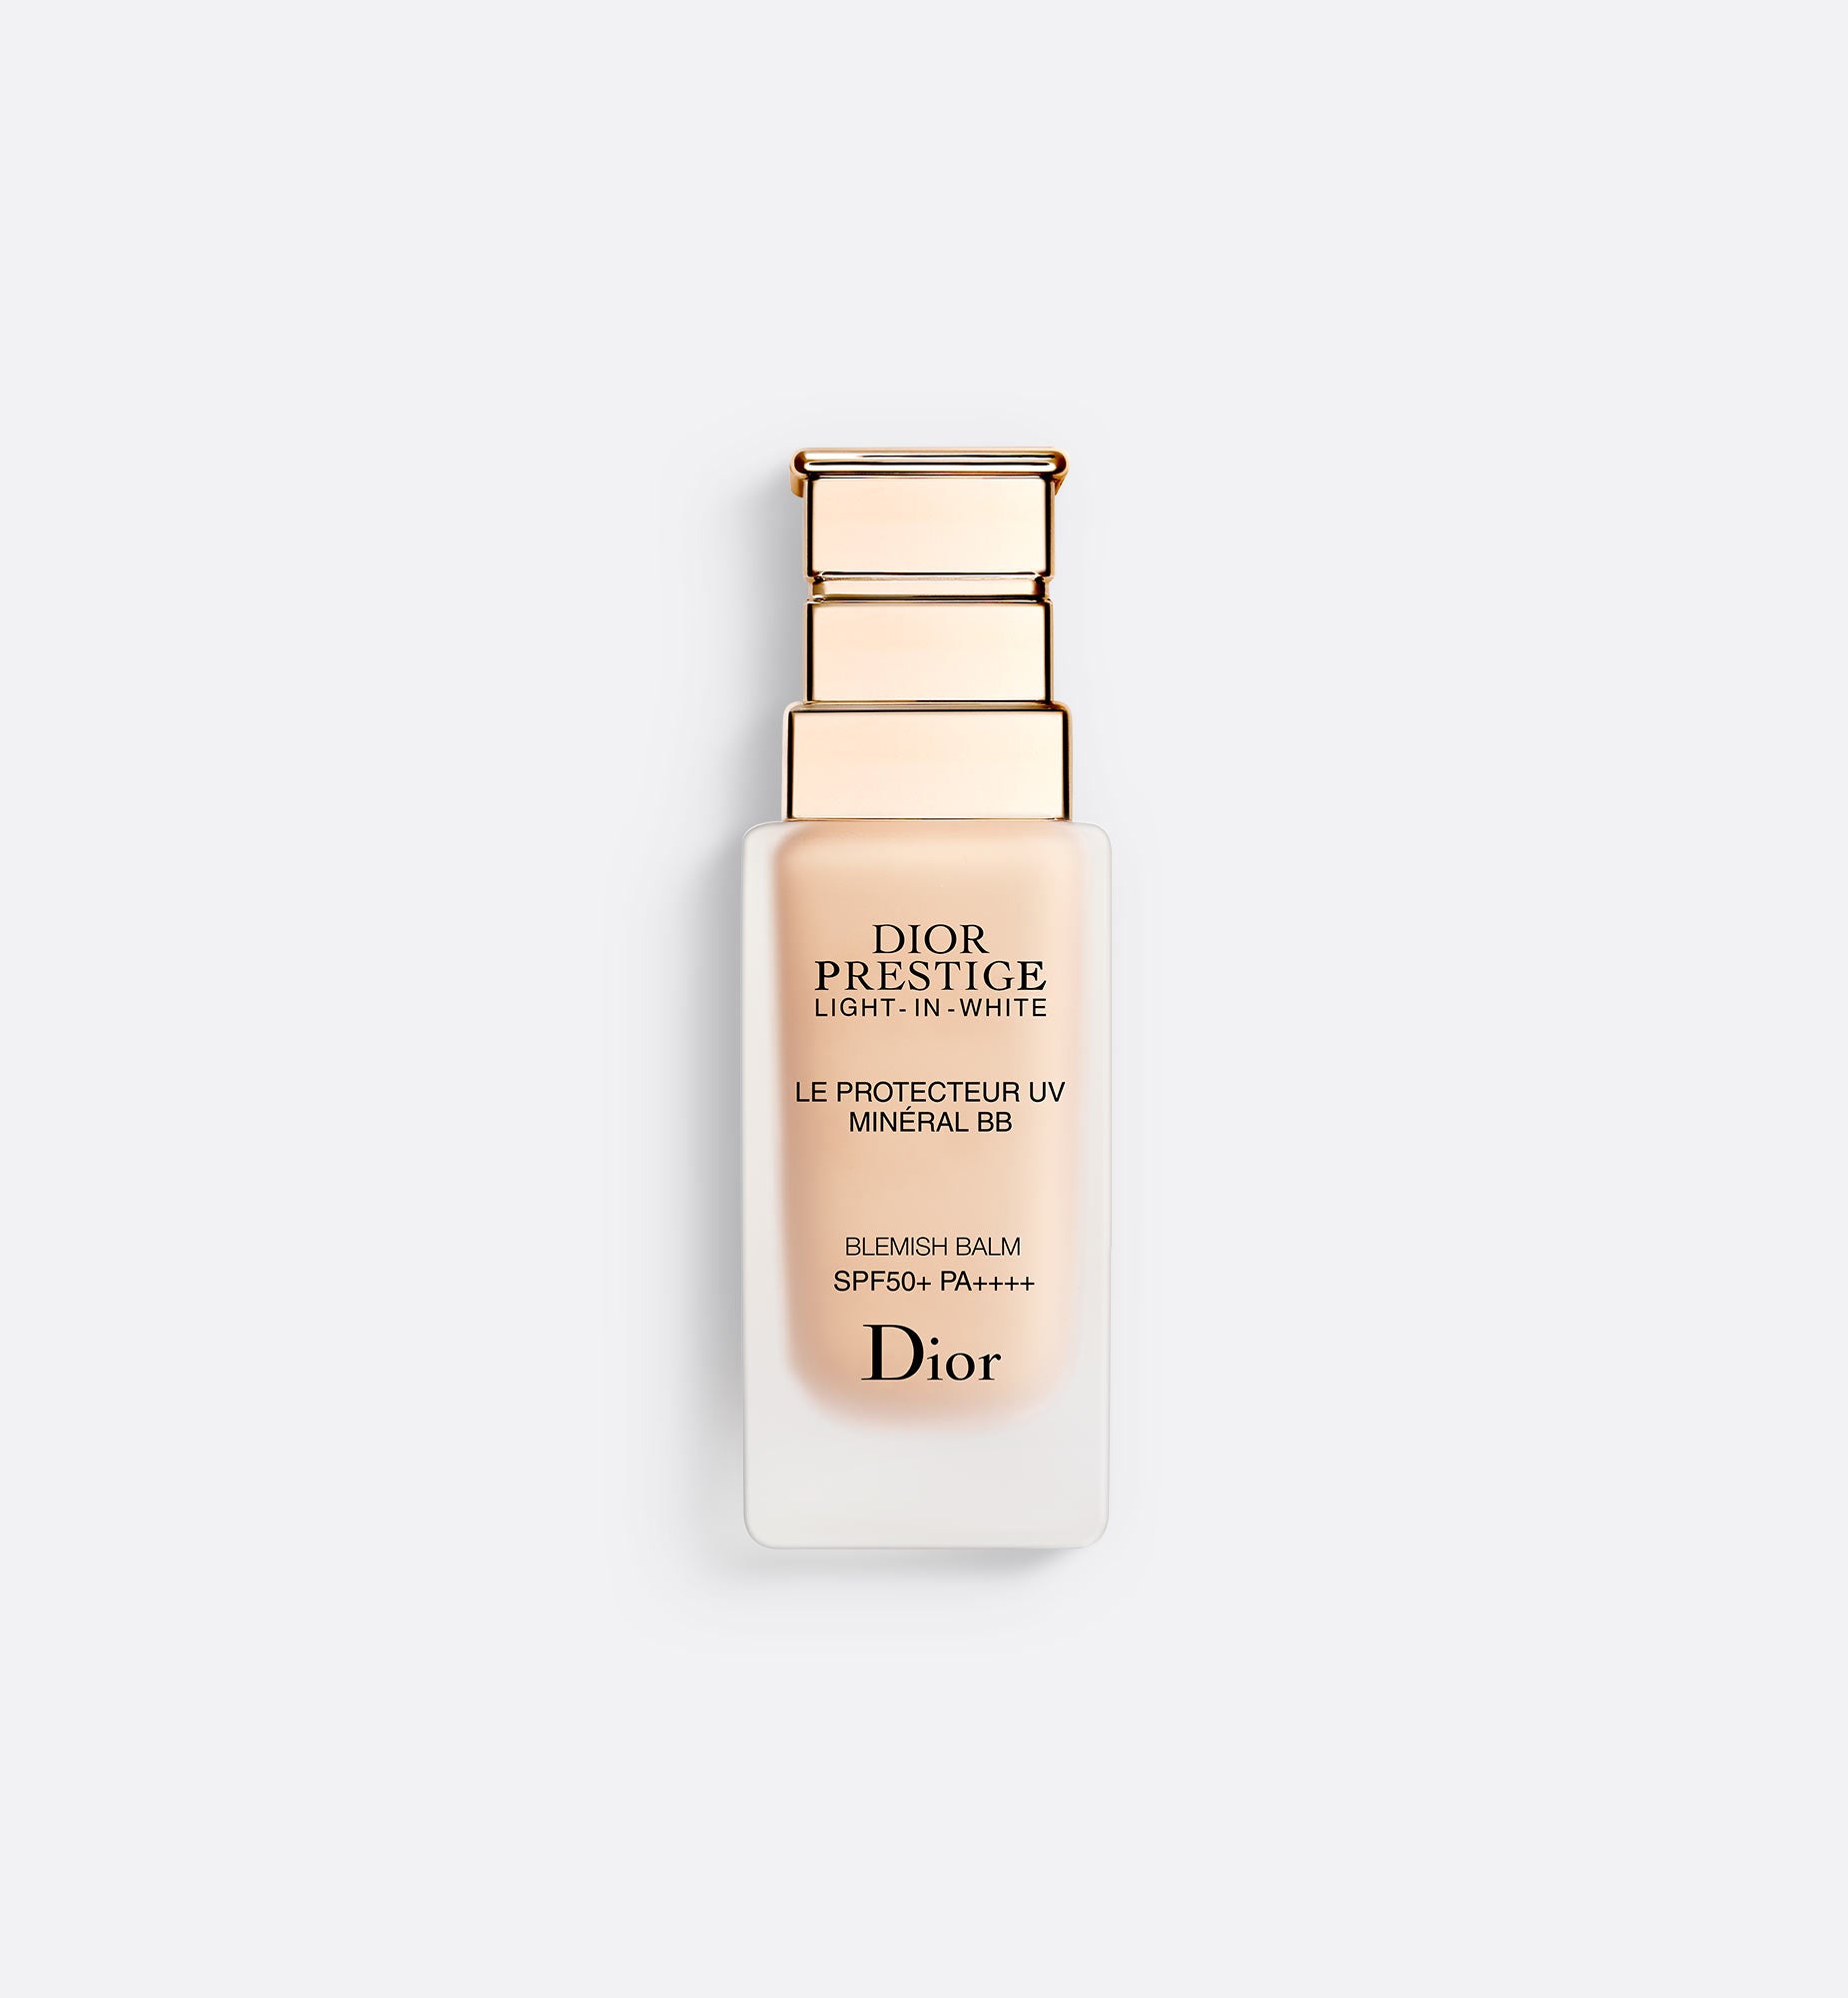 DIOR PRESTIGE LIGHT-IN-WHITE LE PROTECTEUR UV MINÉRAL BB SPF 50+ PA++++ | Tinted Sunscreen - Protective and Anti-Aging Emulsion